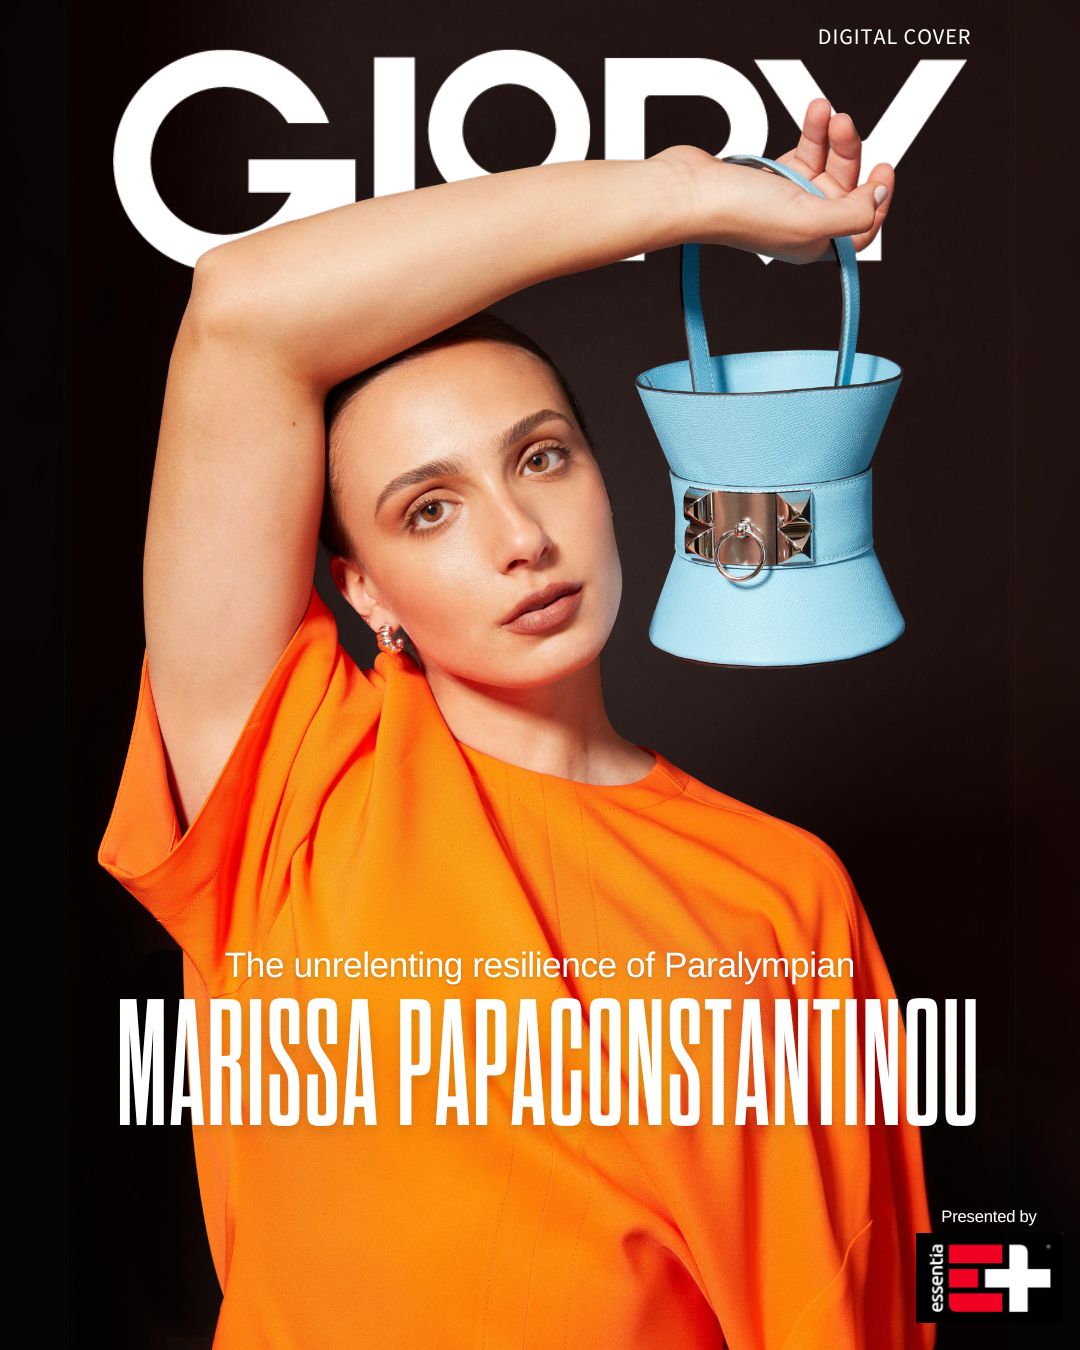 GLORY magazine cover featuring Marissa Papaconstantinou wearing an orange dress holding a light blue bucket purse over her head against a black background.